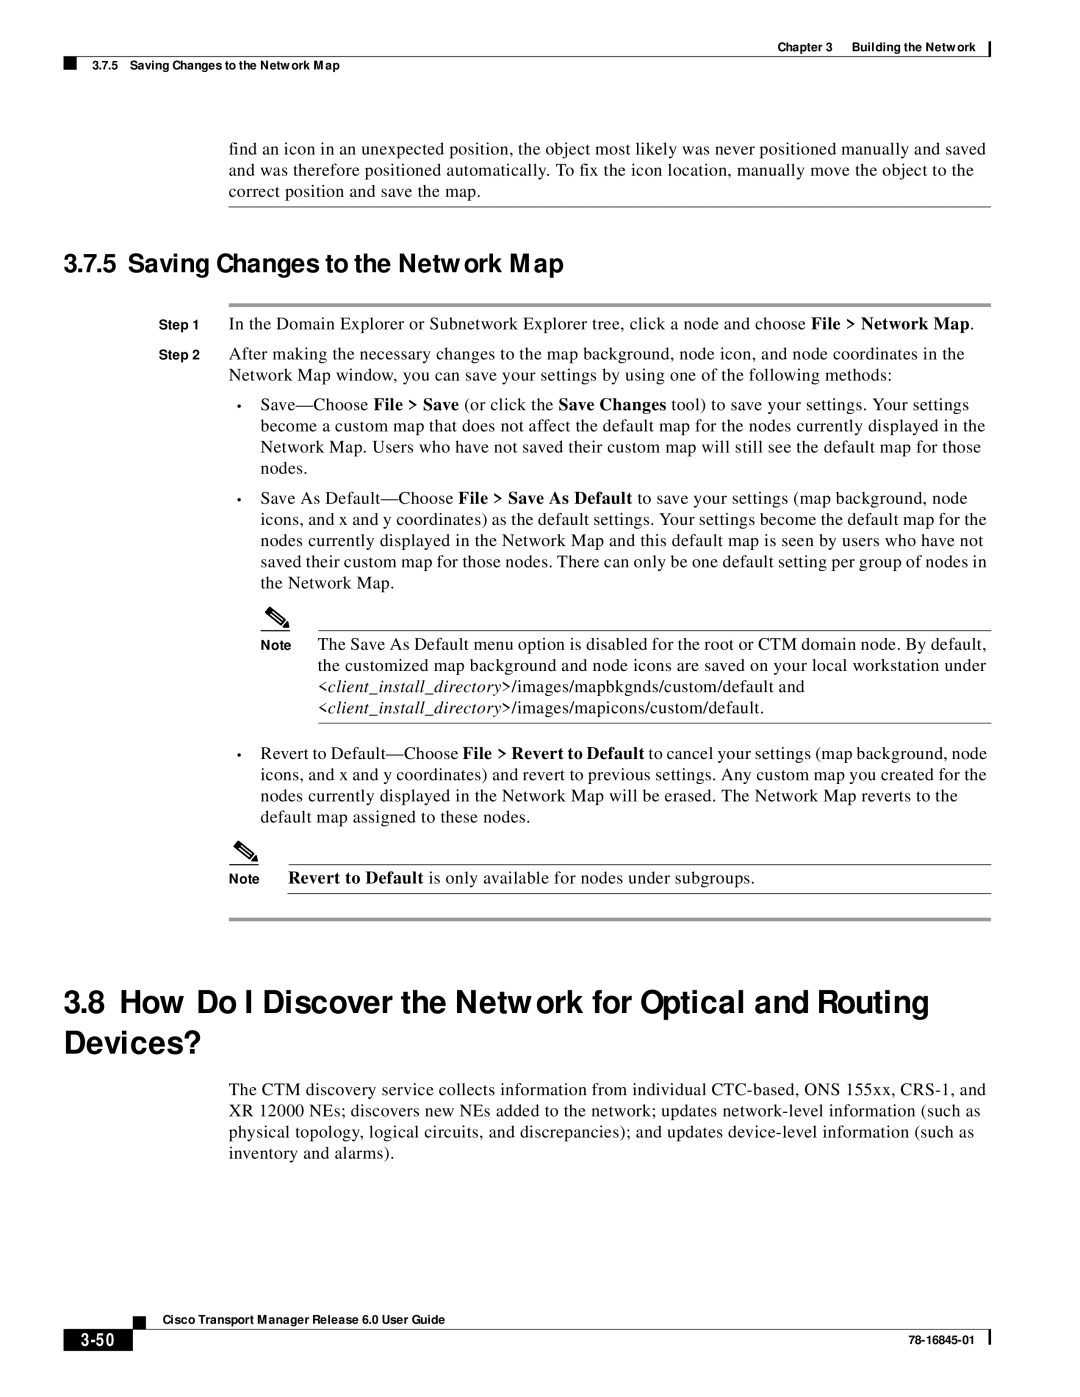 Cisco Systems 78-16845-01 manual How Do I Discover the Network for Optical and Routing Devices?, 3-50 